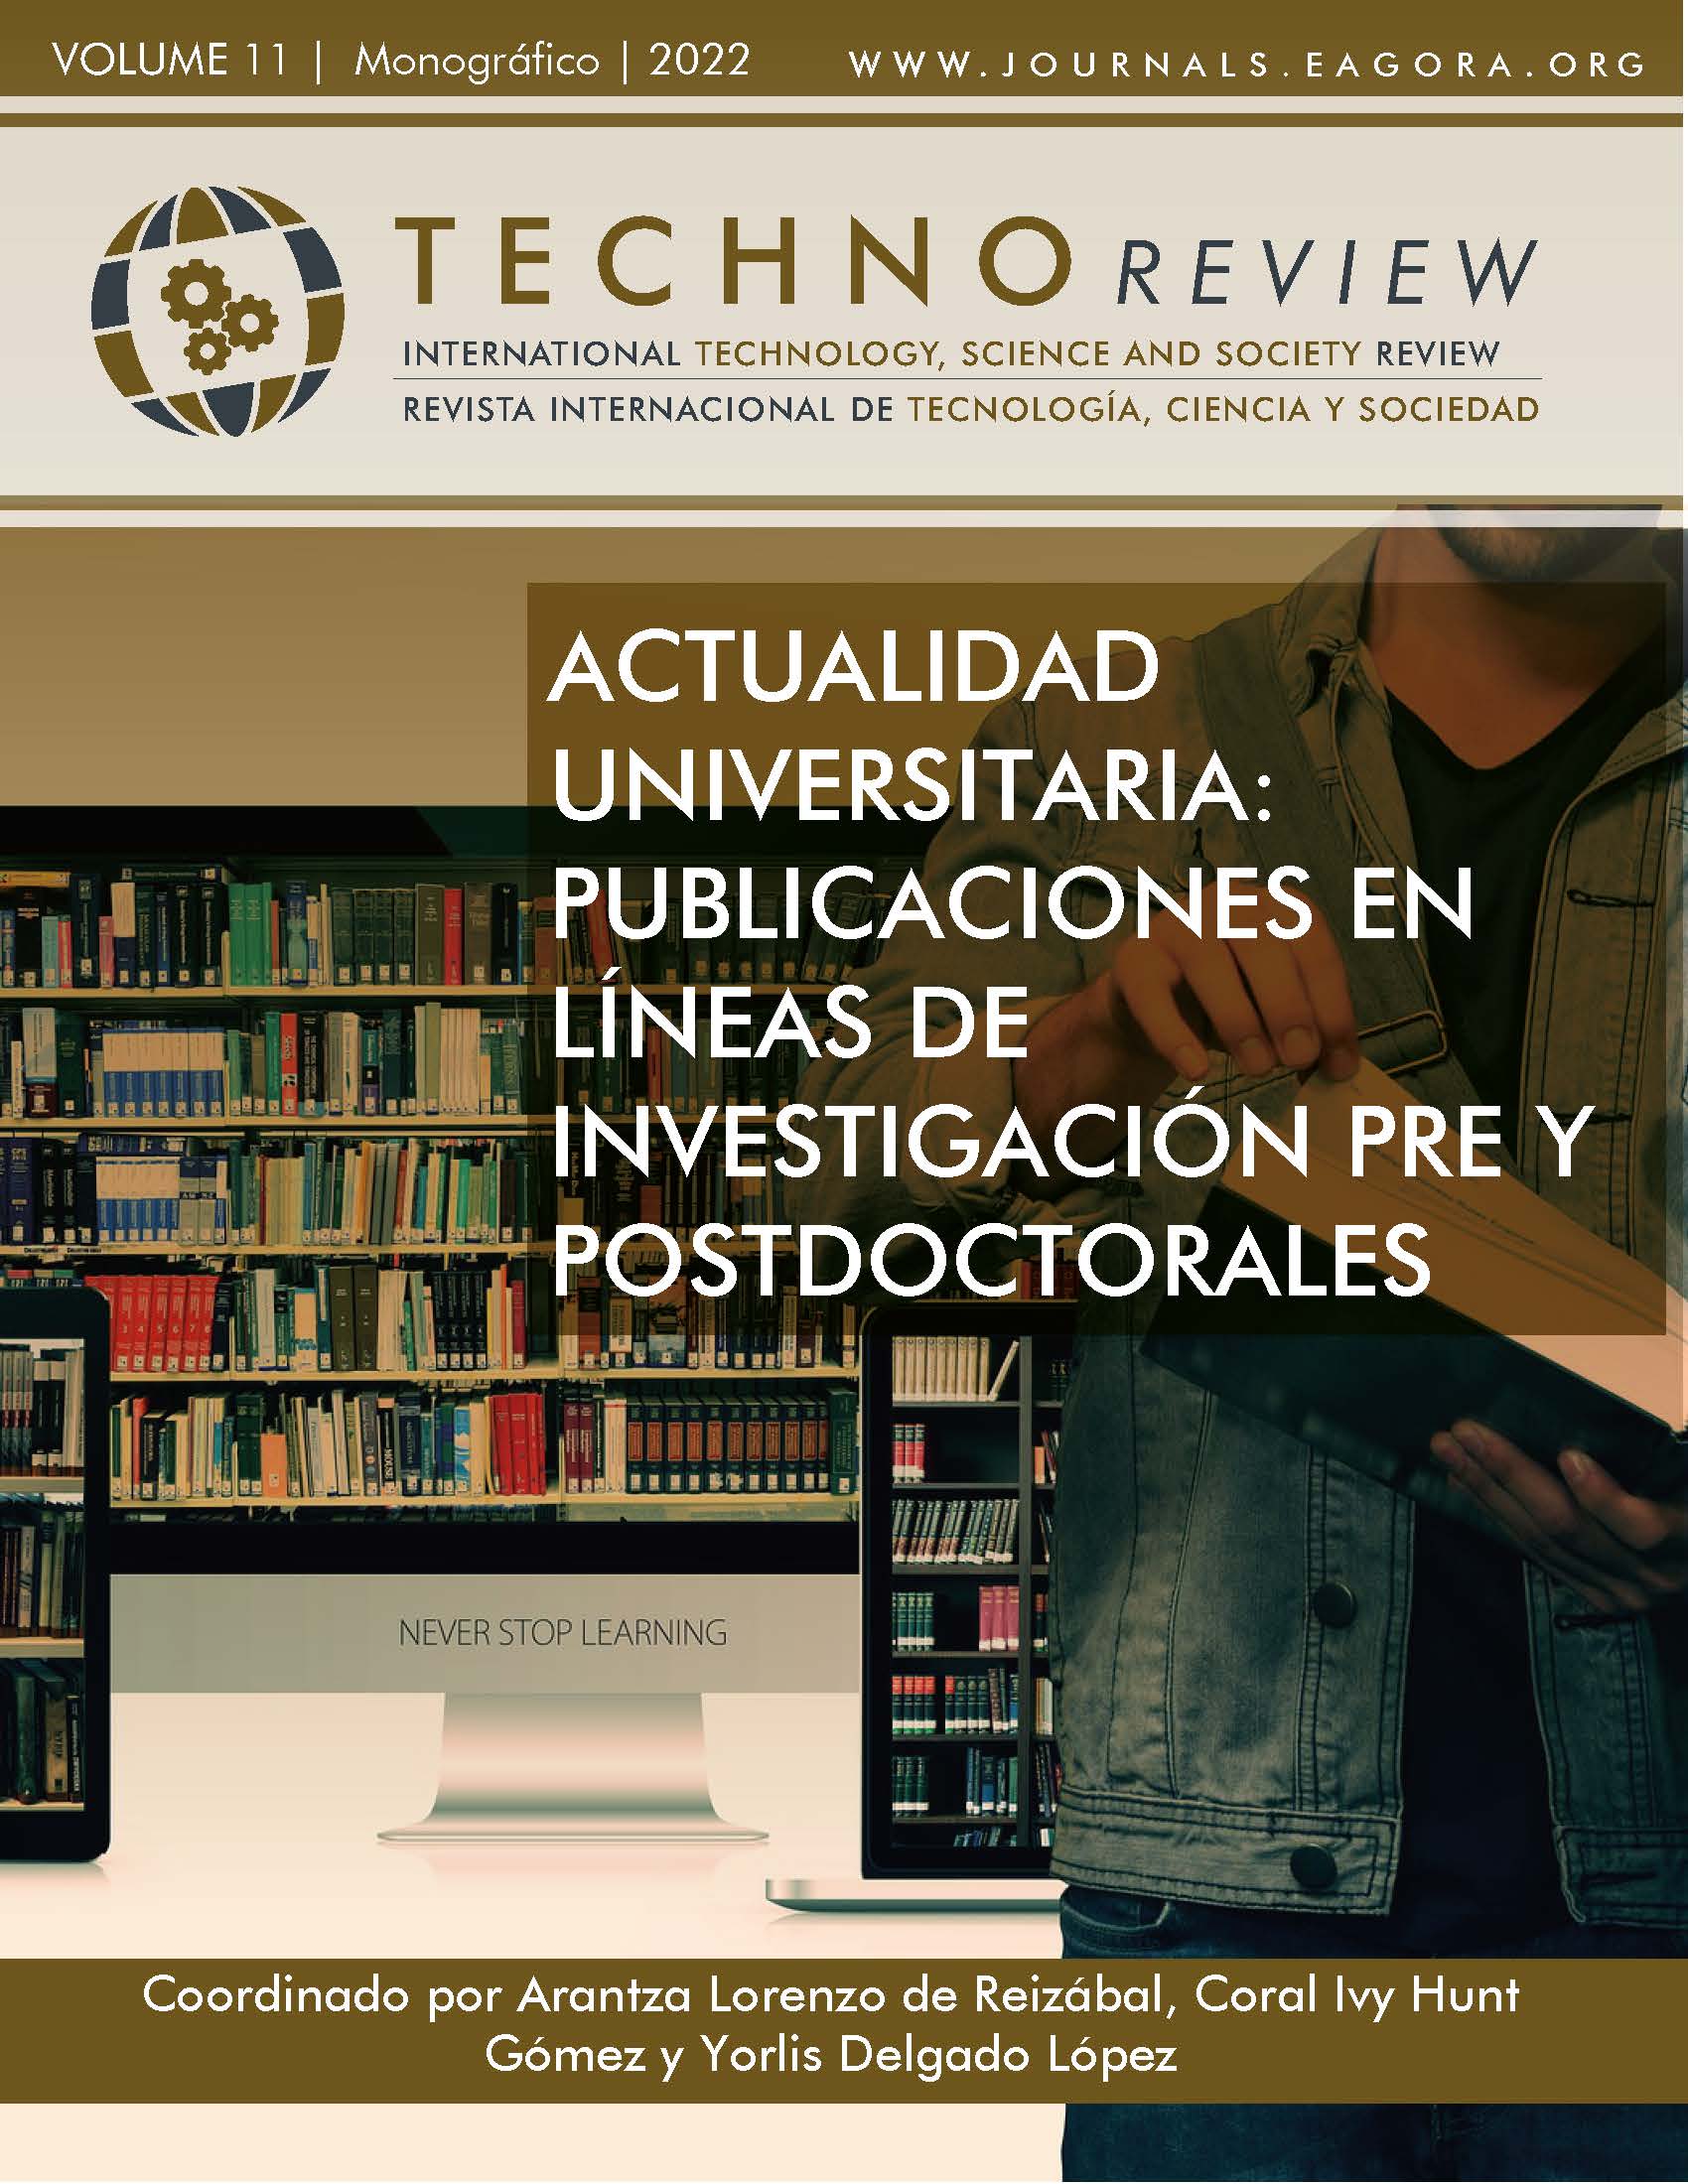 					View Vol. 11 No. 4 (2022): Monograph: "University news: publications in pre- and postdoctoral research lines"
				